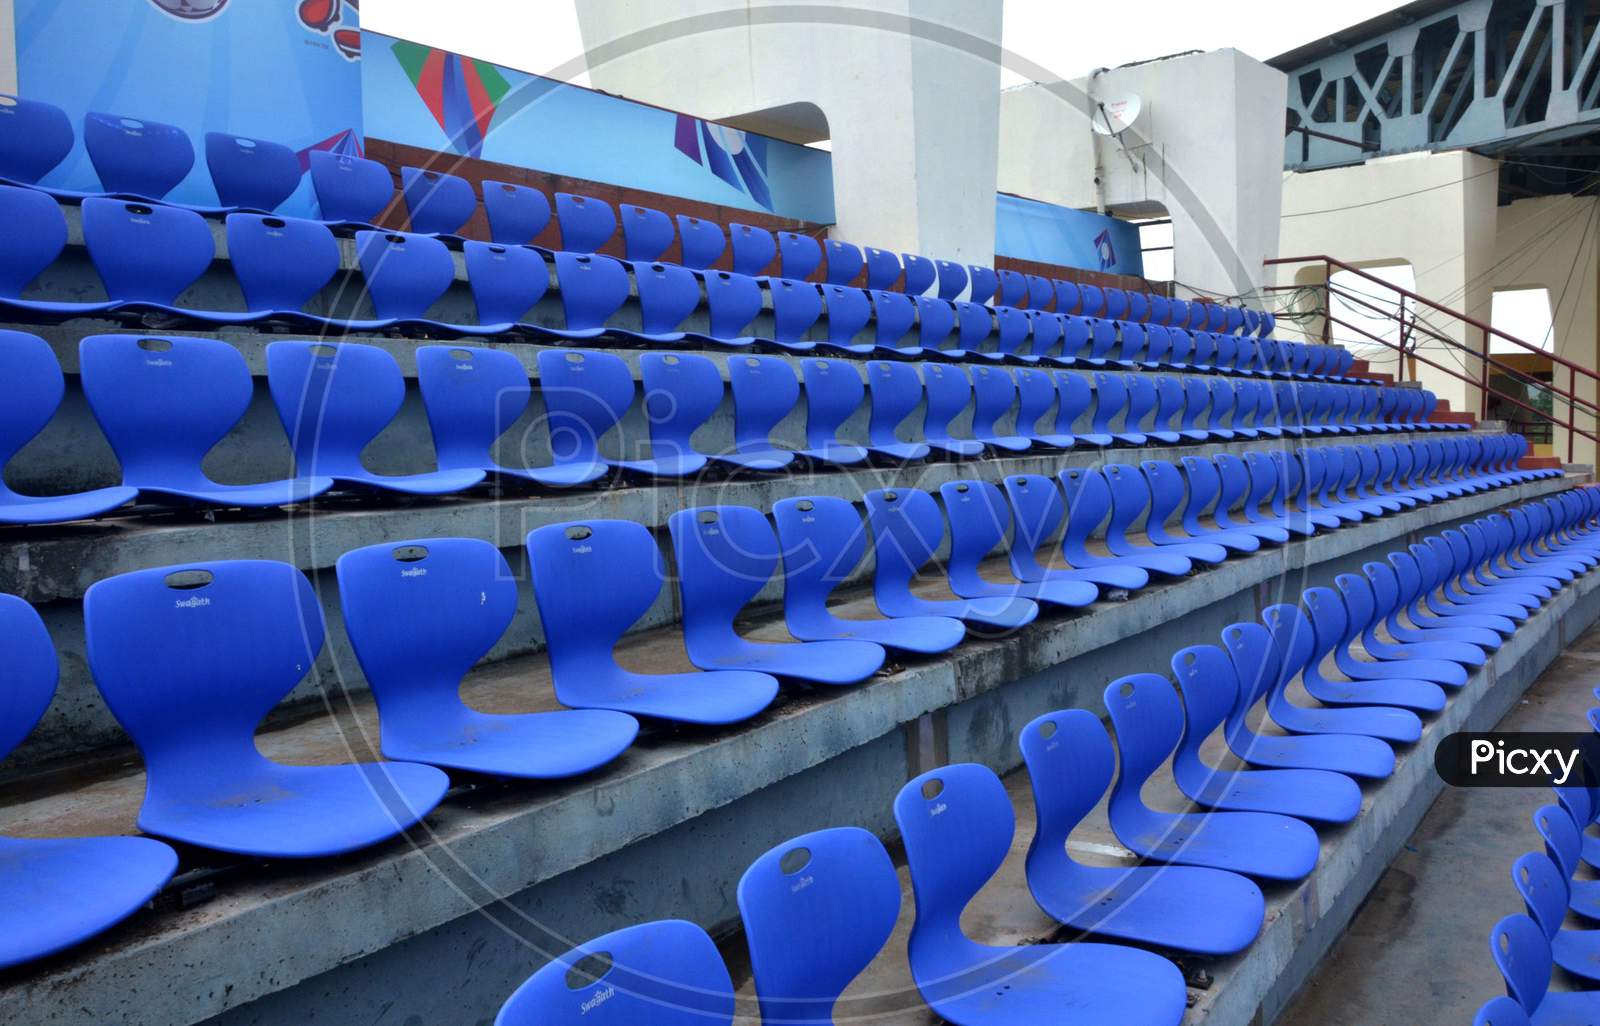 A view of Stadium Chair